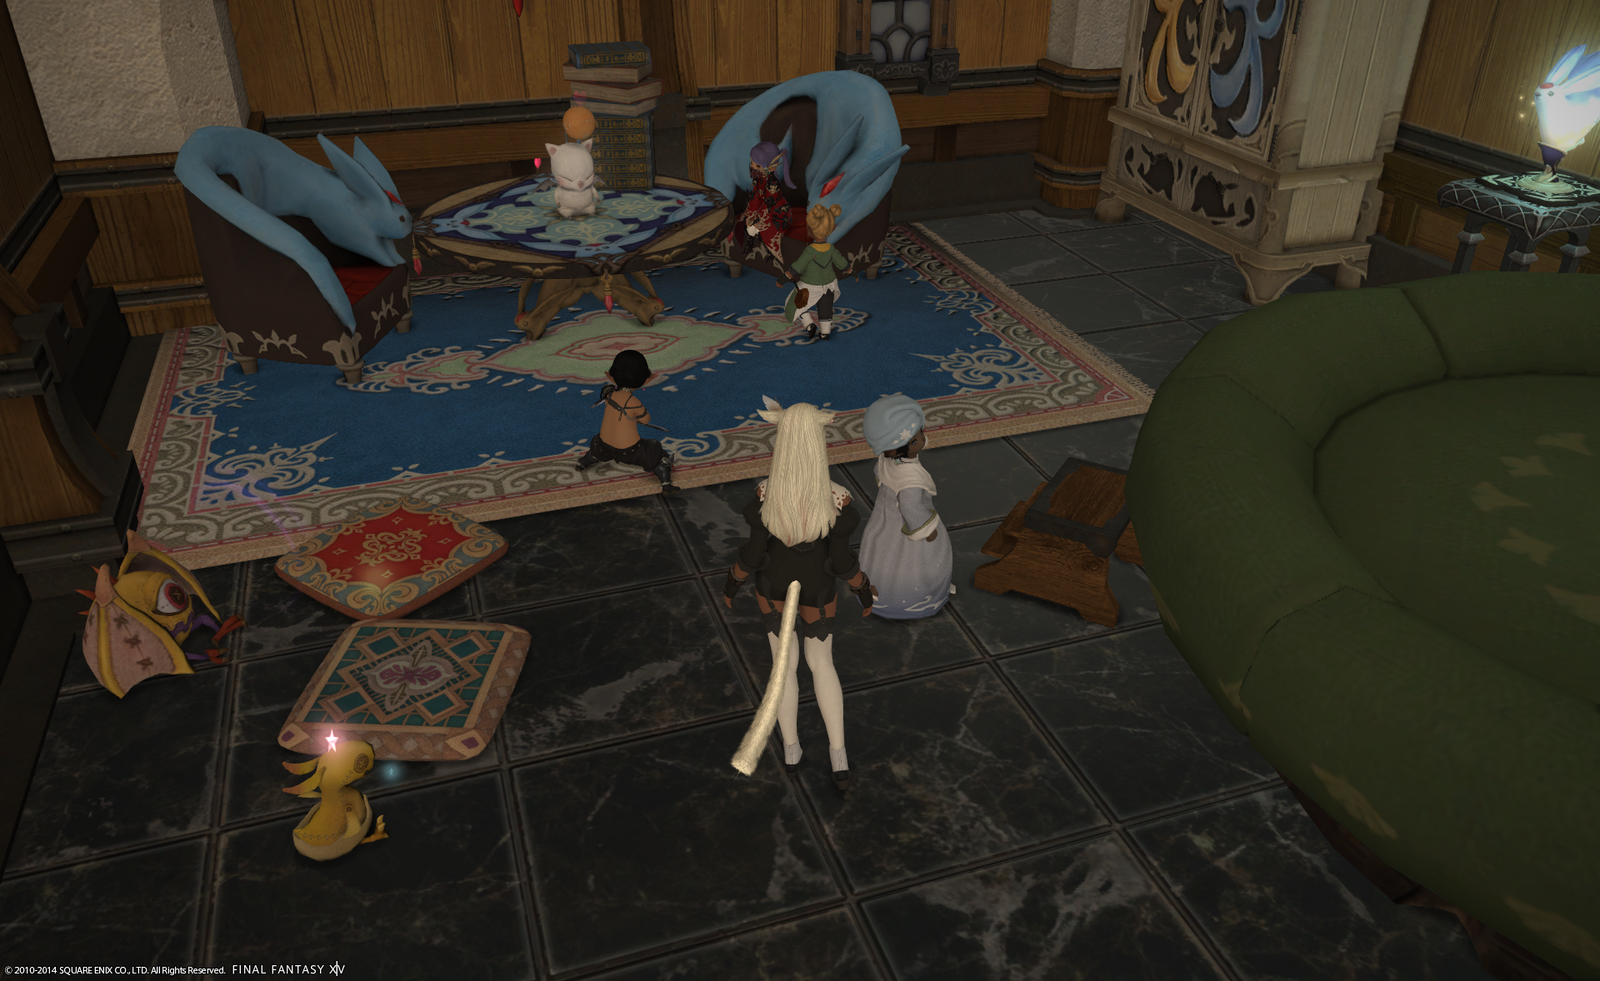 Mansion overrun with Lalafells!